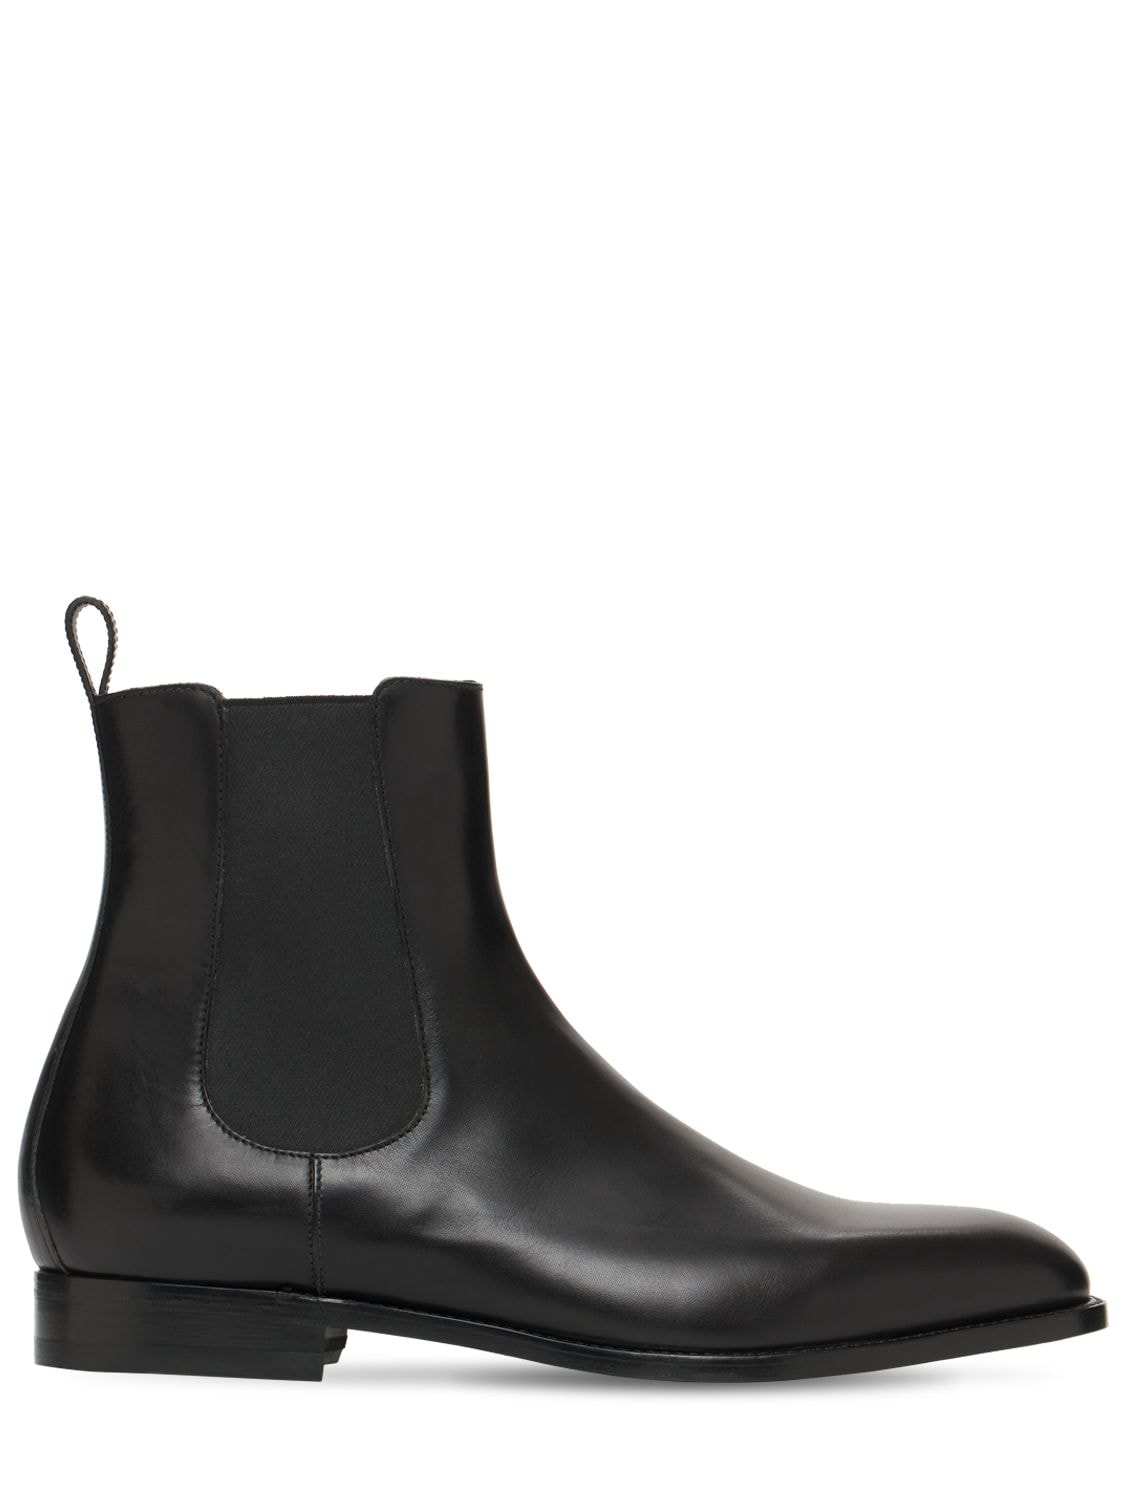 Delsea Leather Chelsea Boots